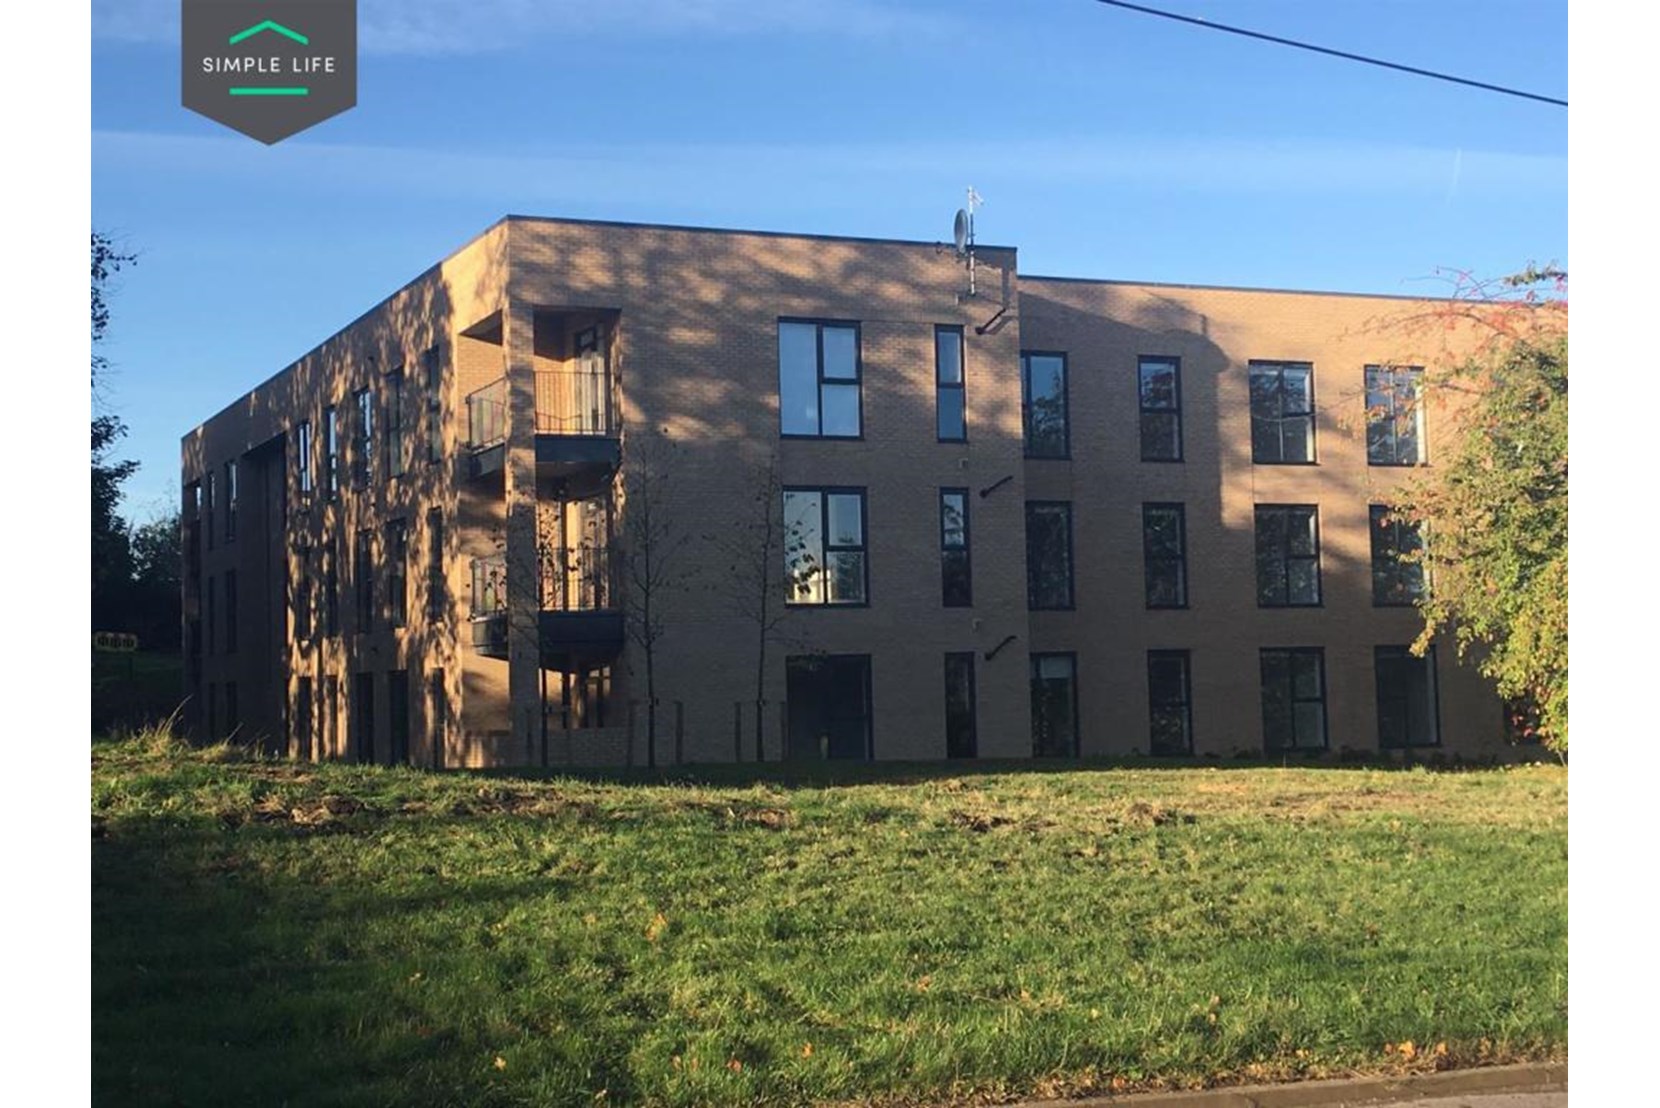 Apartments to Rent by Simple Life in Park Grange House, Sheffield, S2, development panoramic